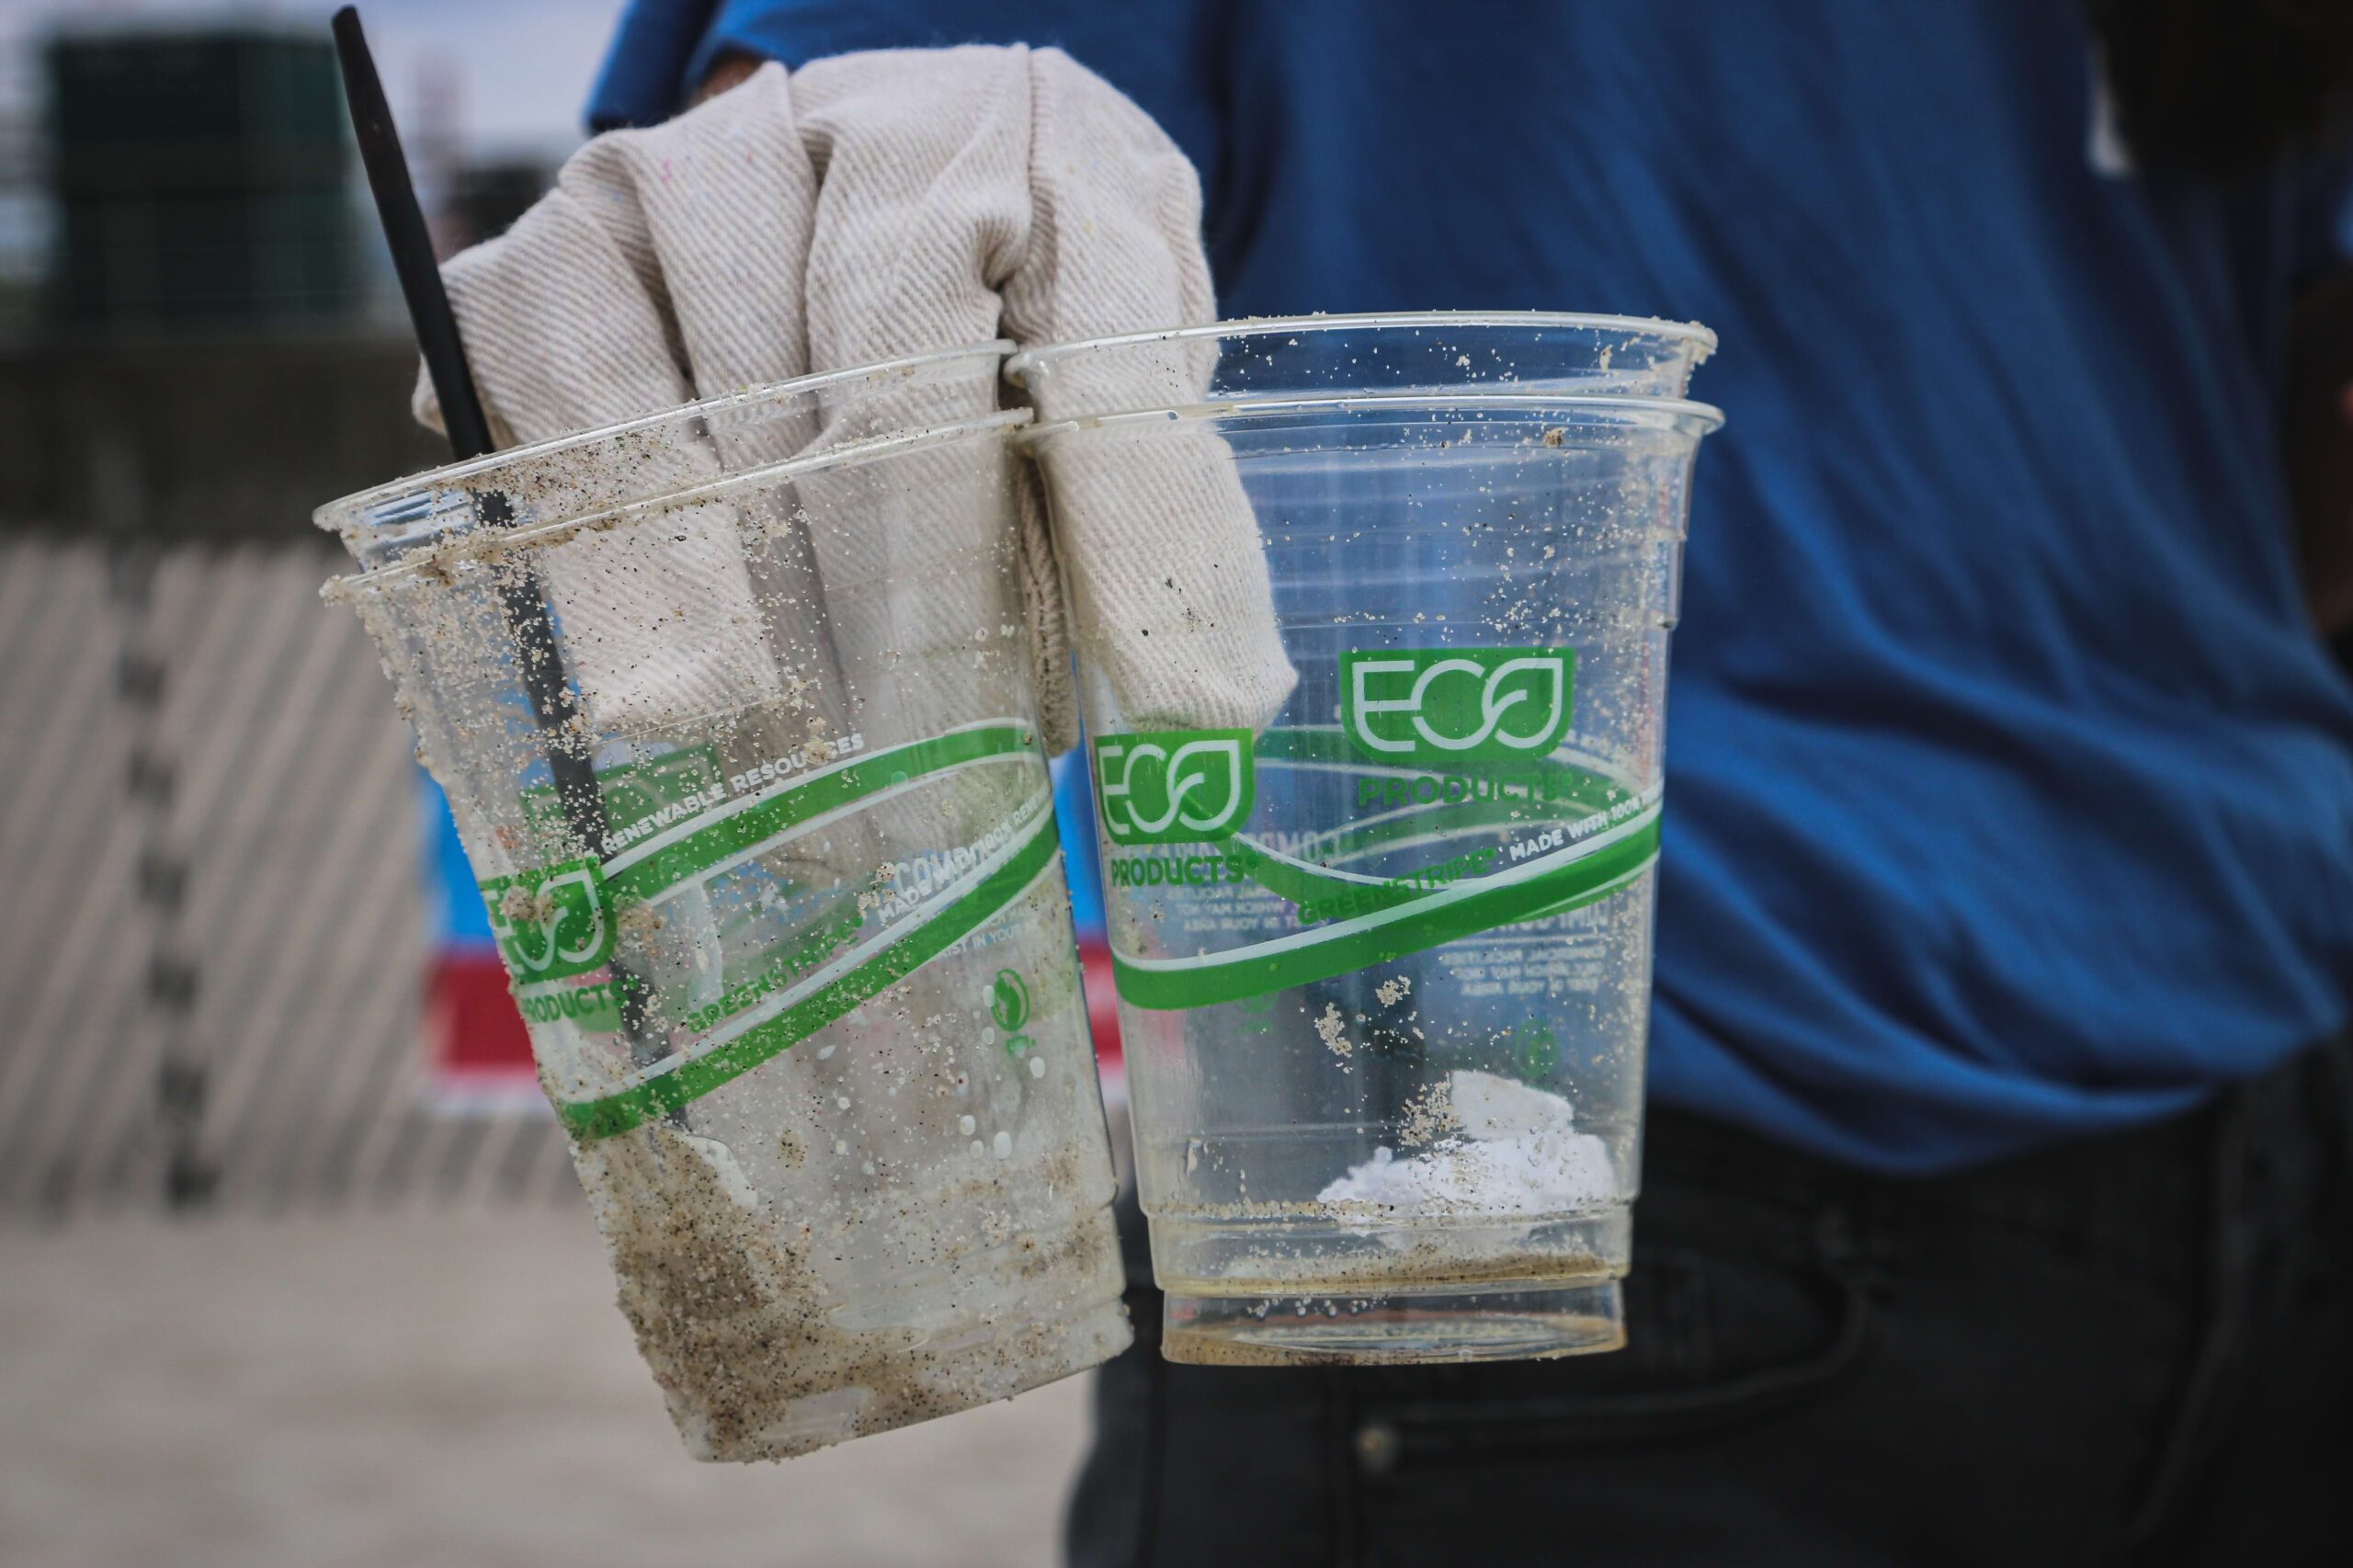 Recycled Plastic: Is It Eco Friendly or Greenwashing? - Going Zero